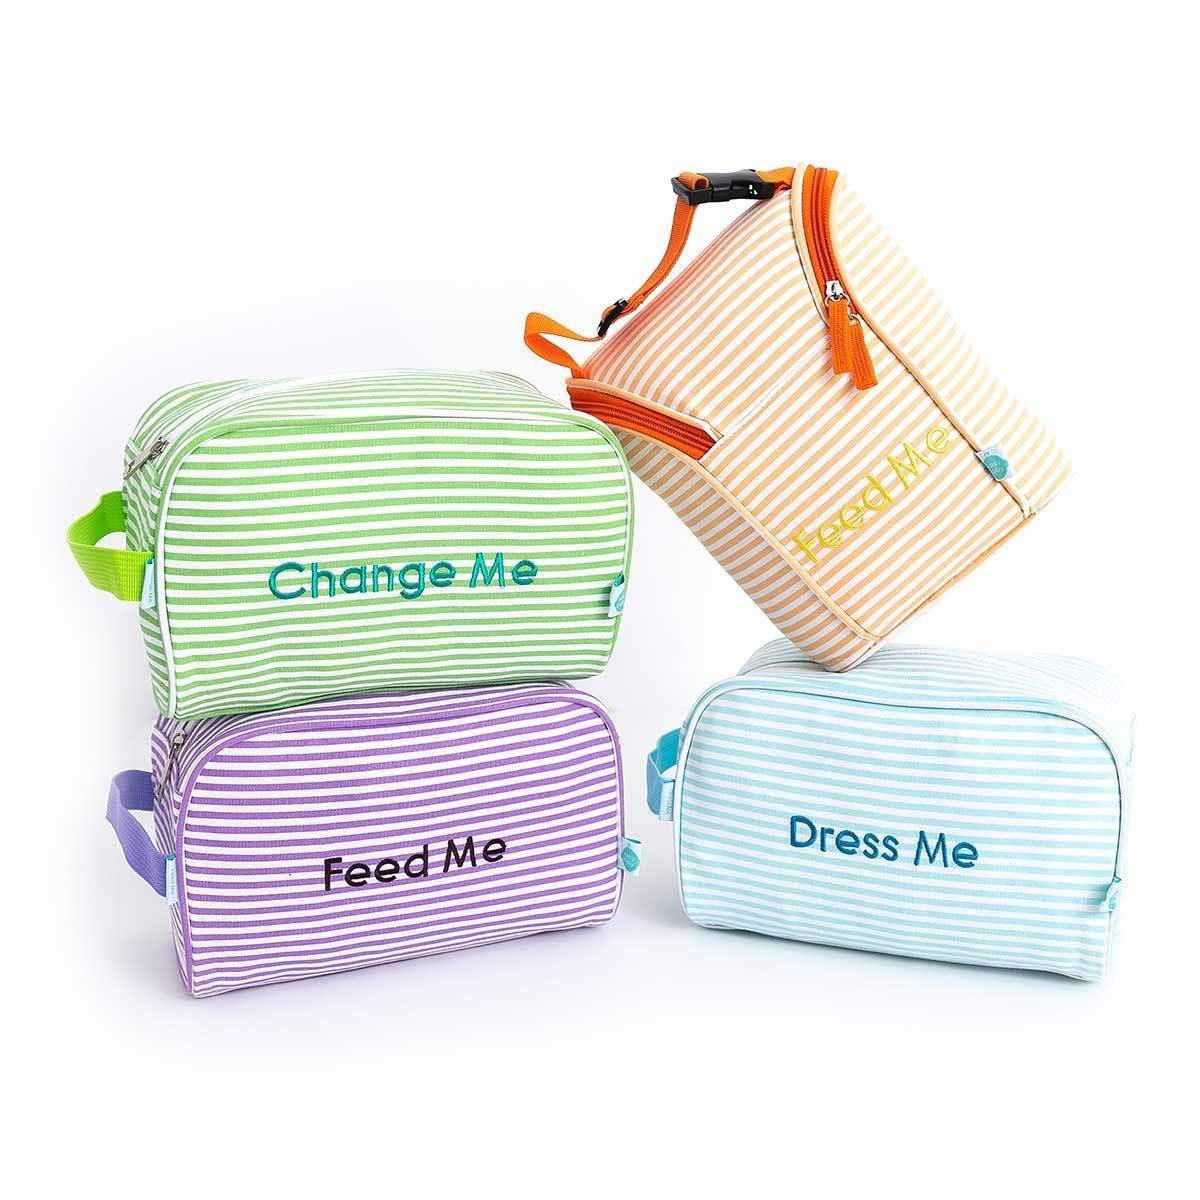 For Nappy Bag Organiser Nappy Bag, 12 Nappy Bag Organisers That Will Fit  Into Any Handbag or Tote